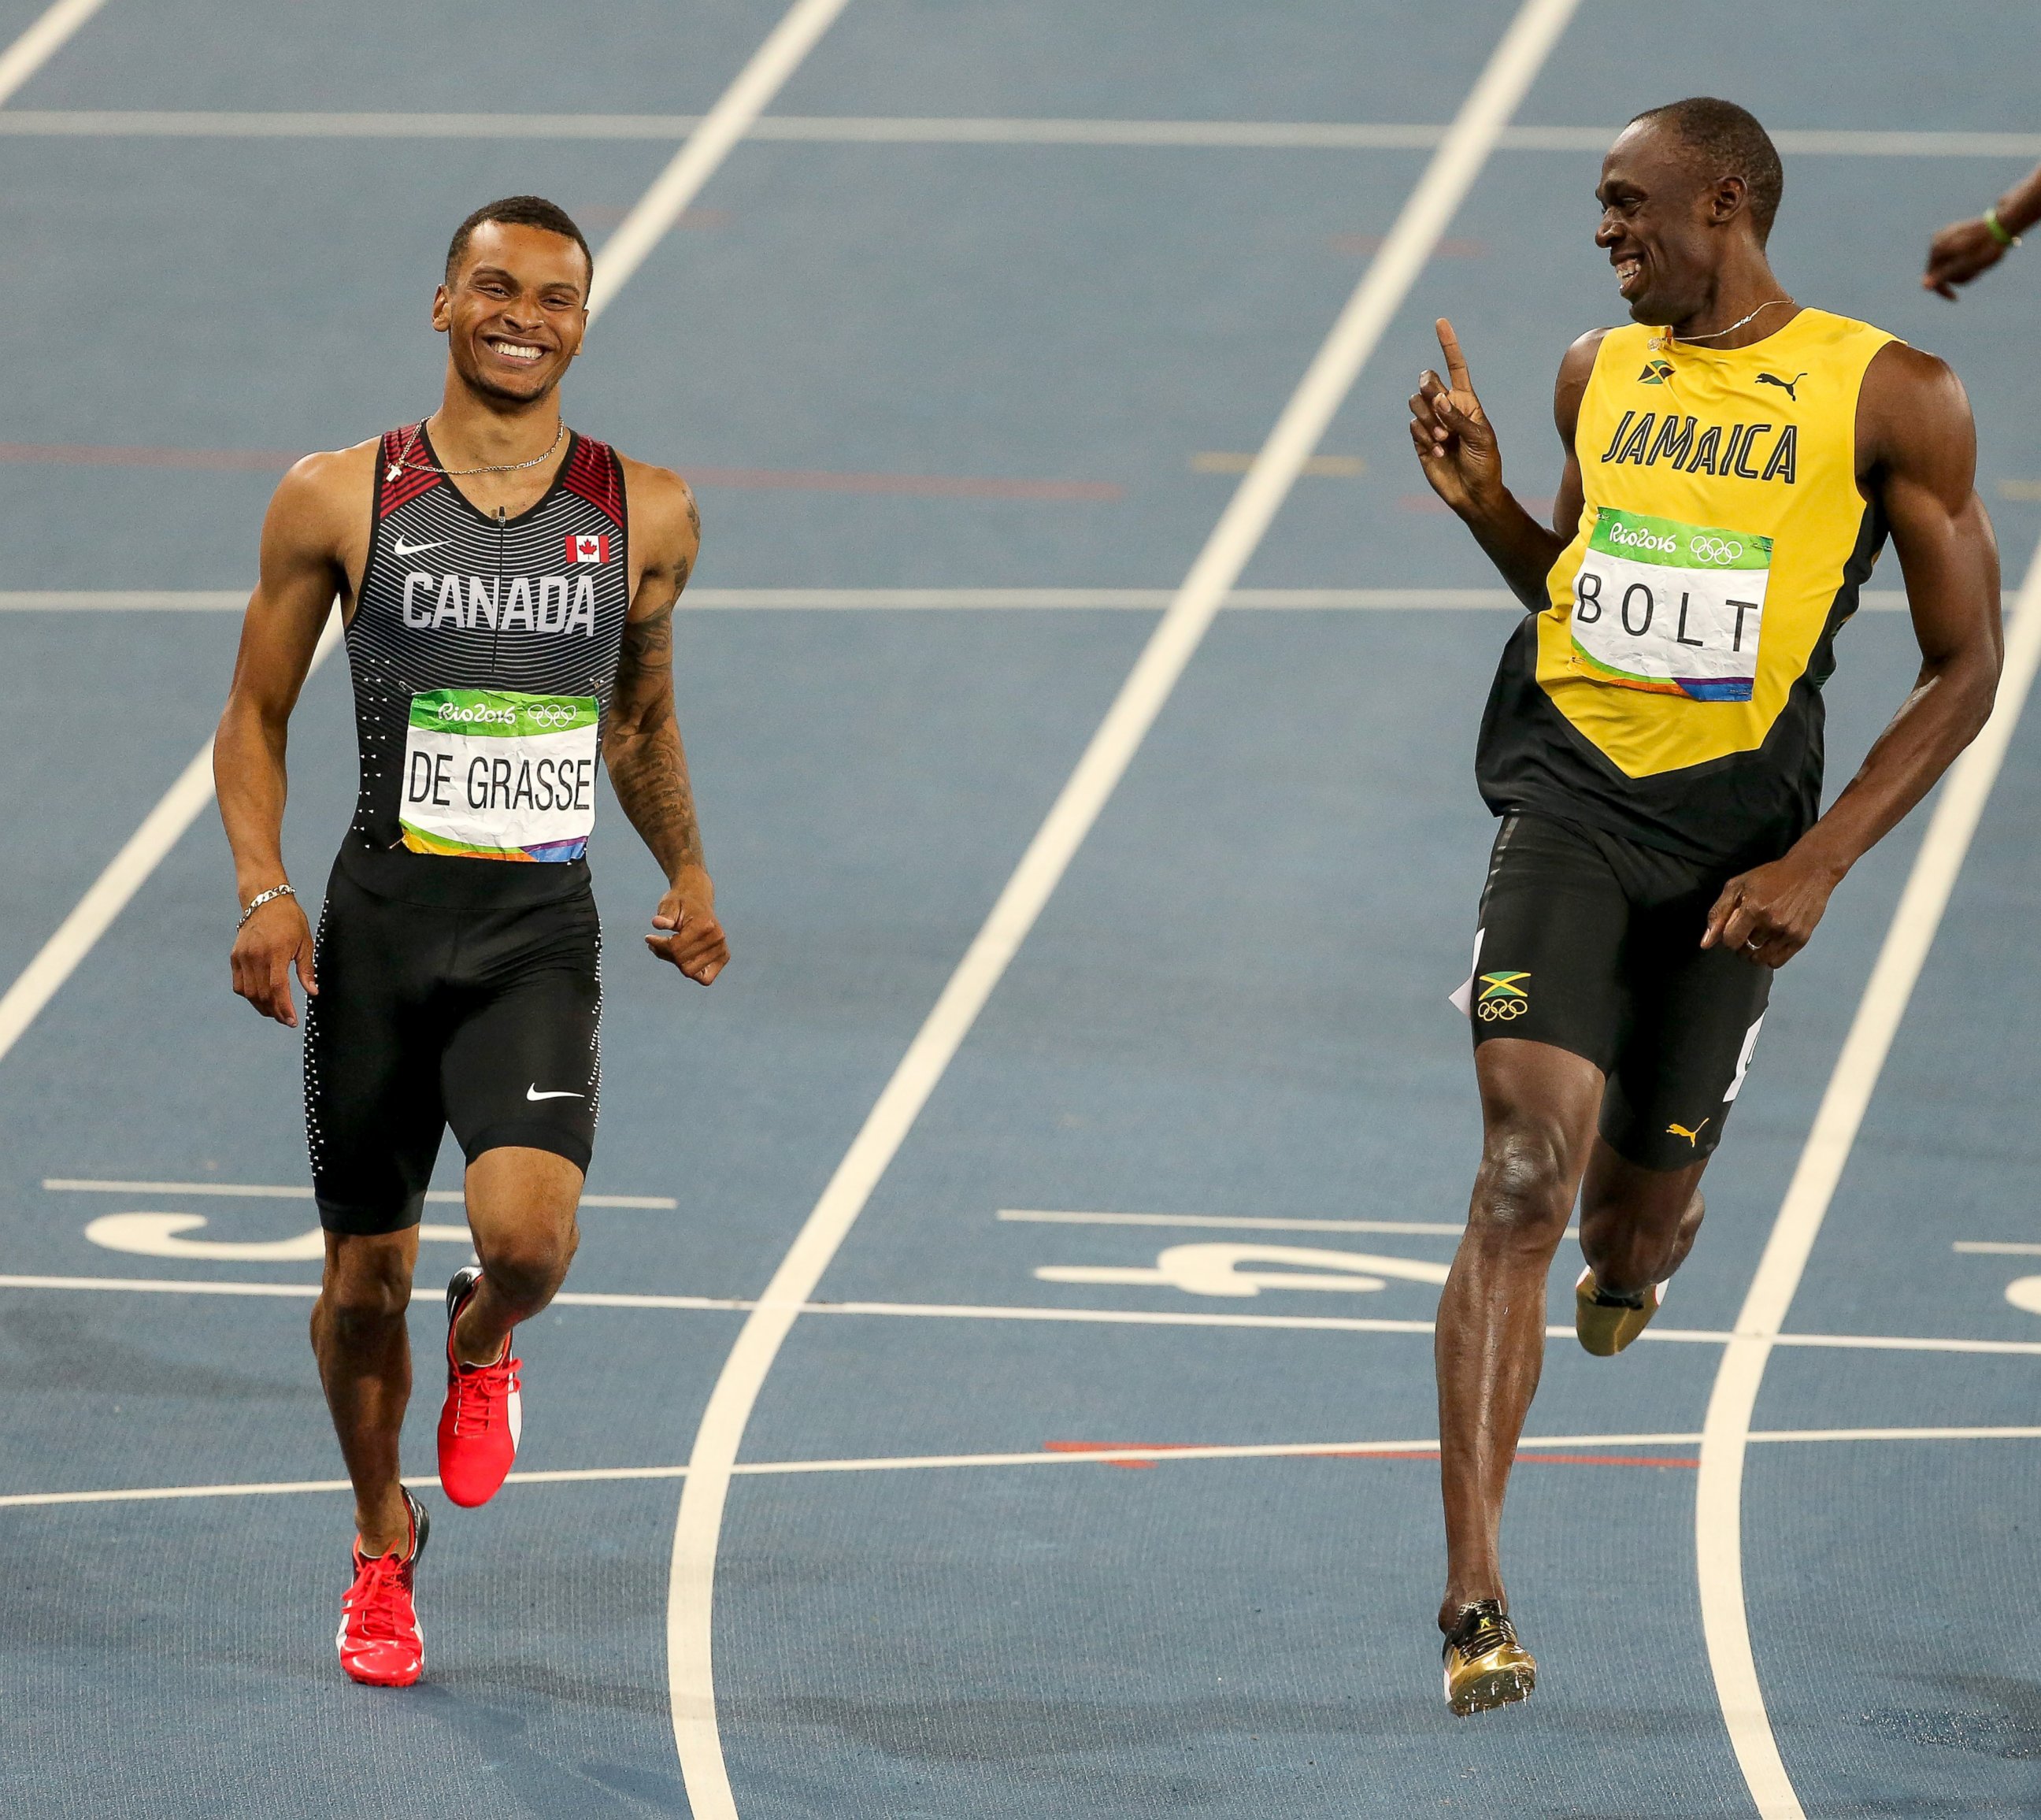 PHOTO: Andre de Grasse of Canada and Usain Bolt of Jamaica compete in the Men's 200m semi finals of the Rio 2016 Olympic Games in Rio de Janeiro, Aug. 17, 2016.